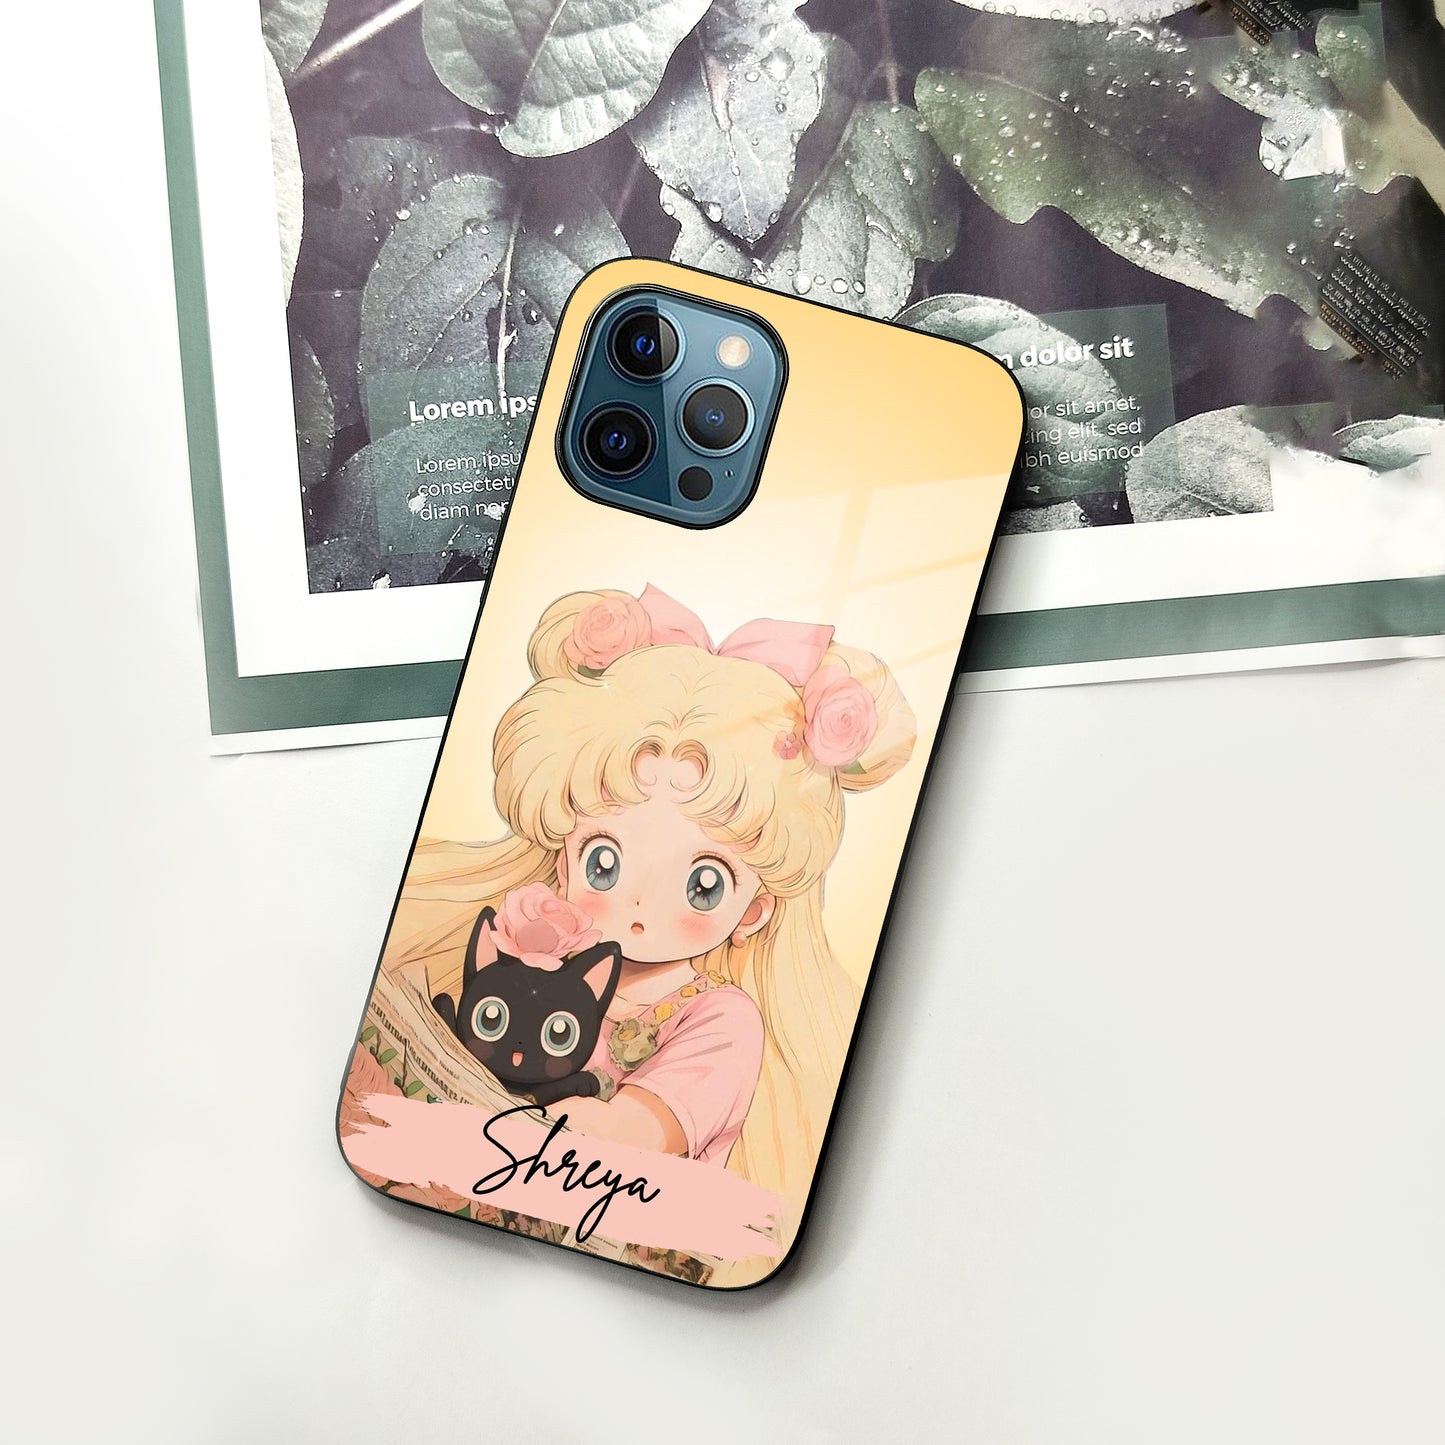 Lovely Sailor Moon Customize Glass Case Cover For iPhone